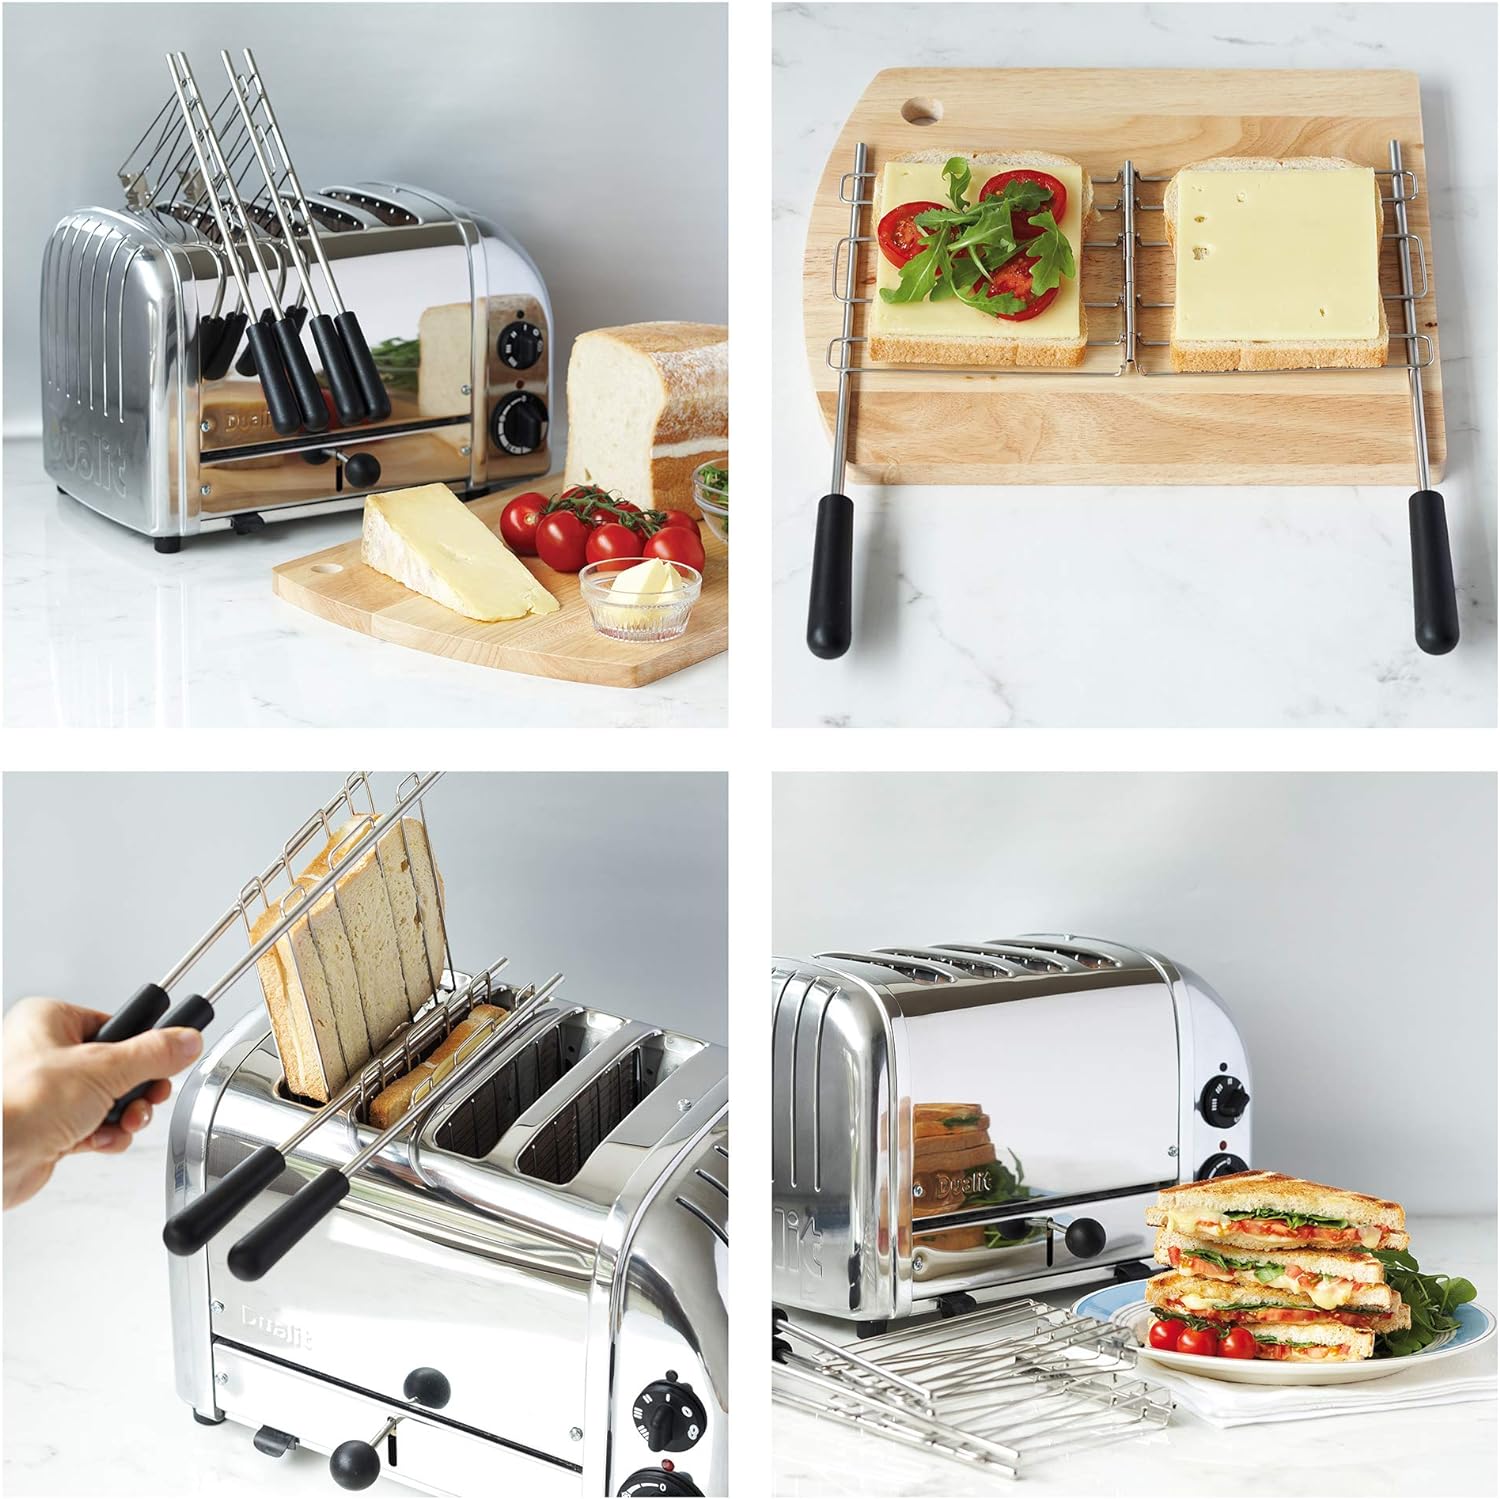 Dualit Lite Sandwich Cage x 2 for Dualit Lite, Architect and Domus Toasters | Make toasted sandwiches in your Dualit Toaster | Pack of 2 Sandwiches Cages | Sandwich Cage with Drip Tray